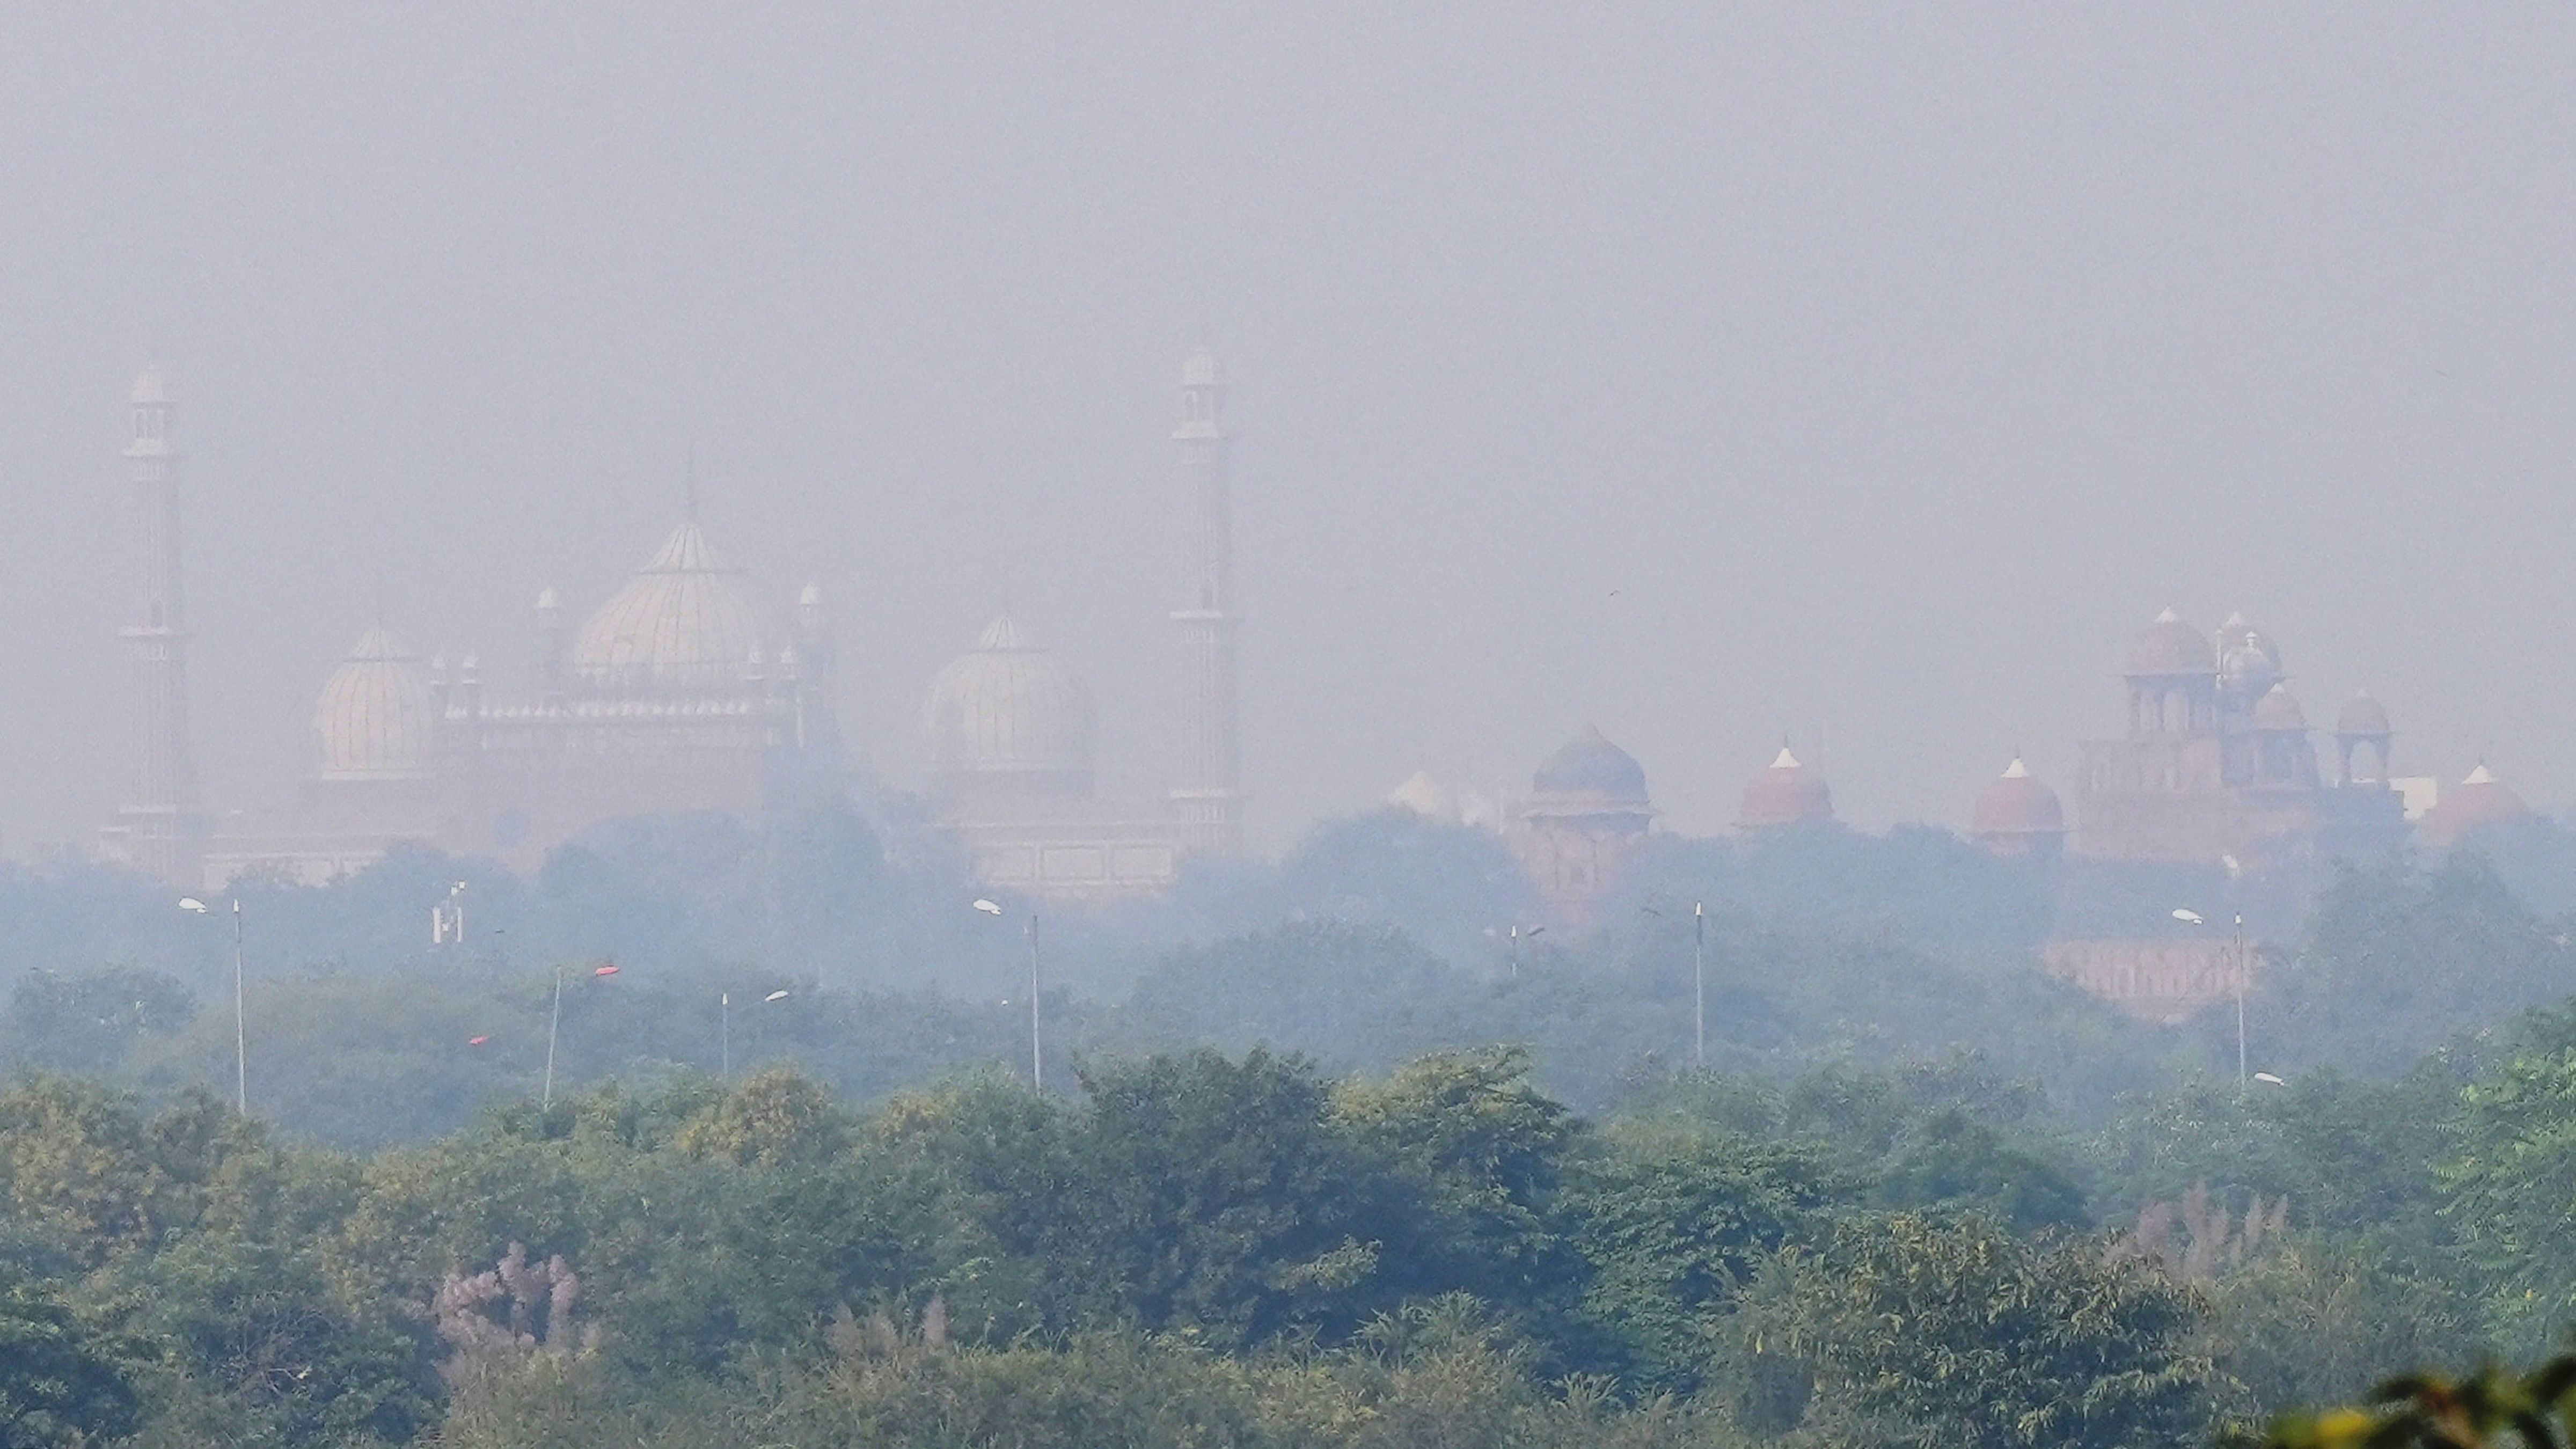 Jama Masjid shrouded in a thick layer of smog, a day after Diwali celebrations, in New Delhi. Credit: PTI Photo